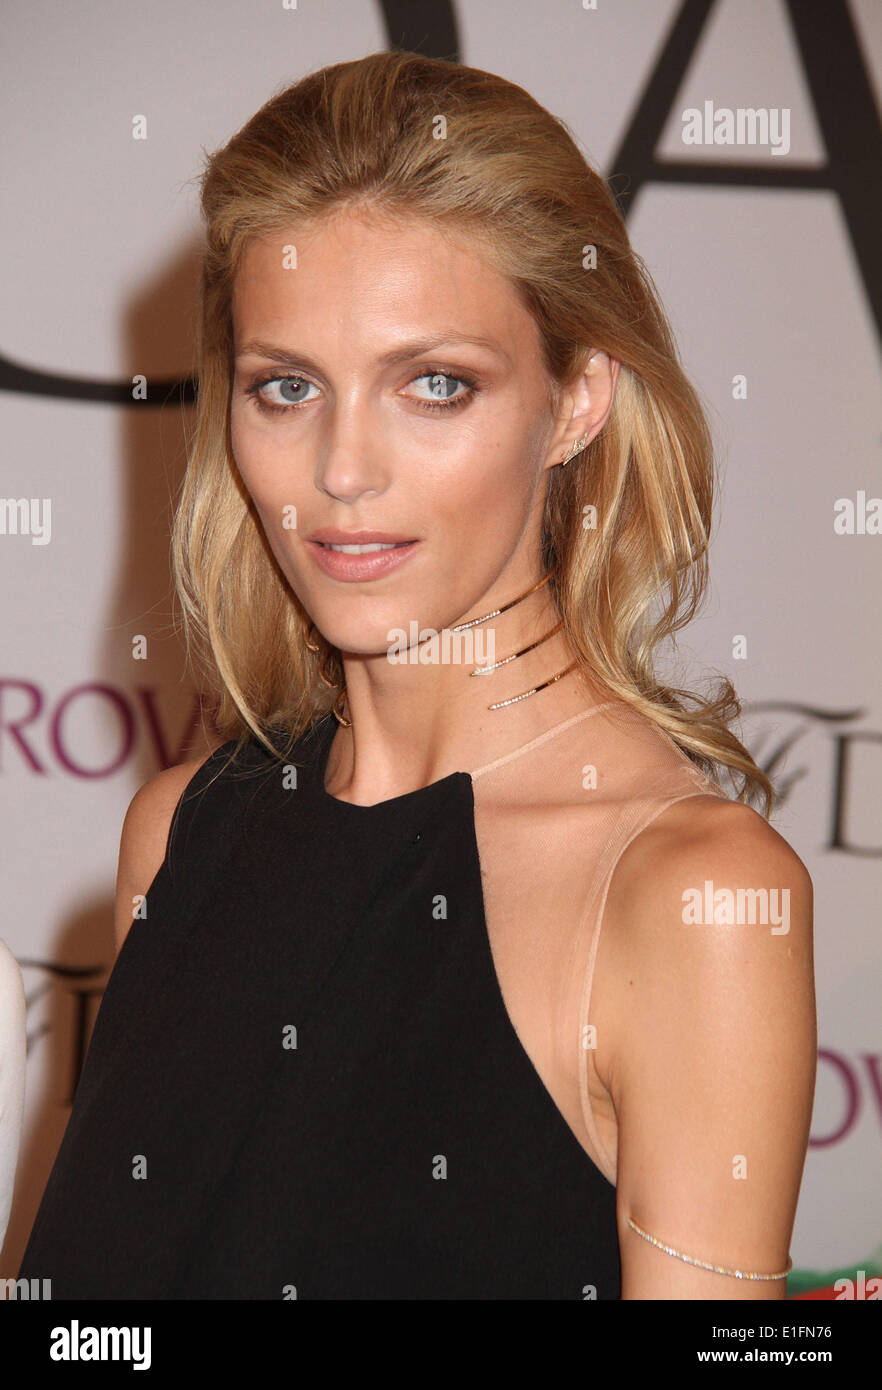 New York, New York, USA. 2nd June, 2014. Model ANJA RUBIK attends the 2014 CFDA (Council of Fashion Designers of America) Awards held at Alice Tully Hall at Lincoln Center. Credit:  Nancy Kaszerman/ZUMAPRESS.com/Alamy Live News Stock Photo